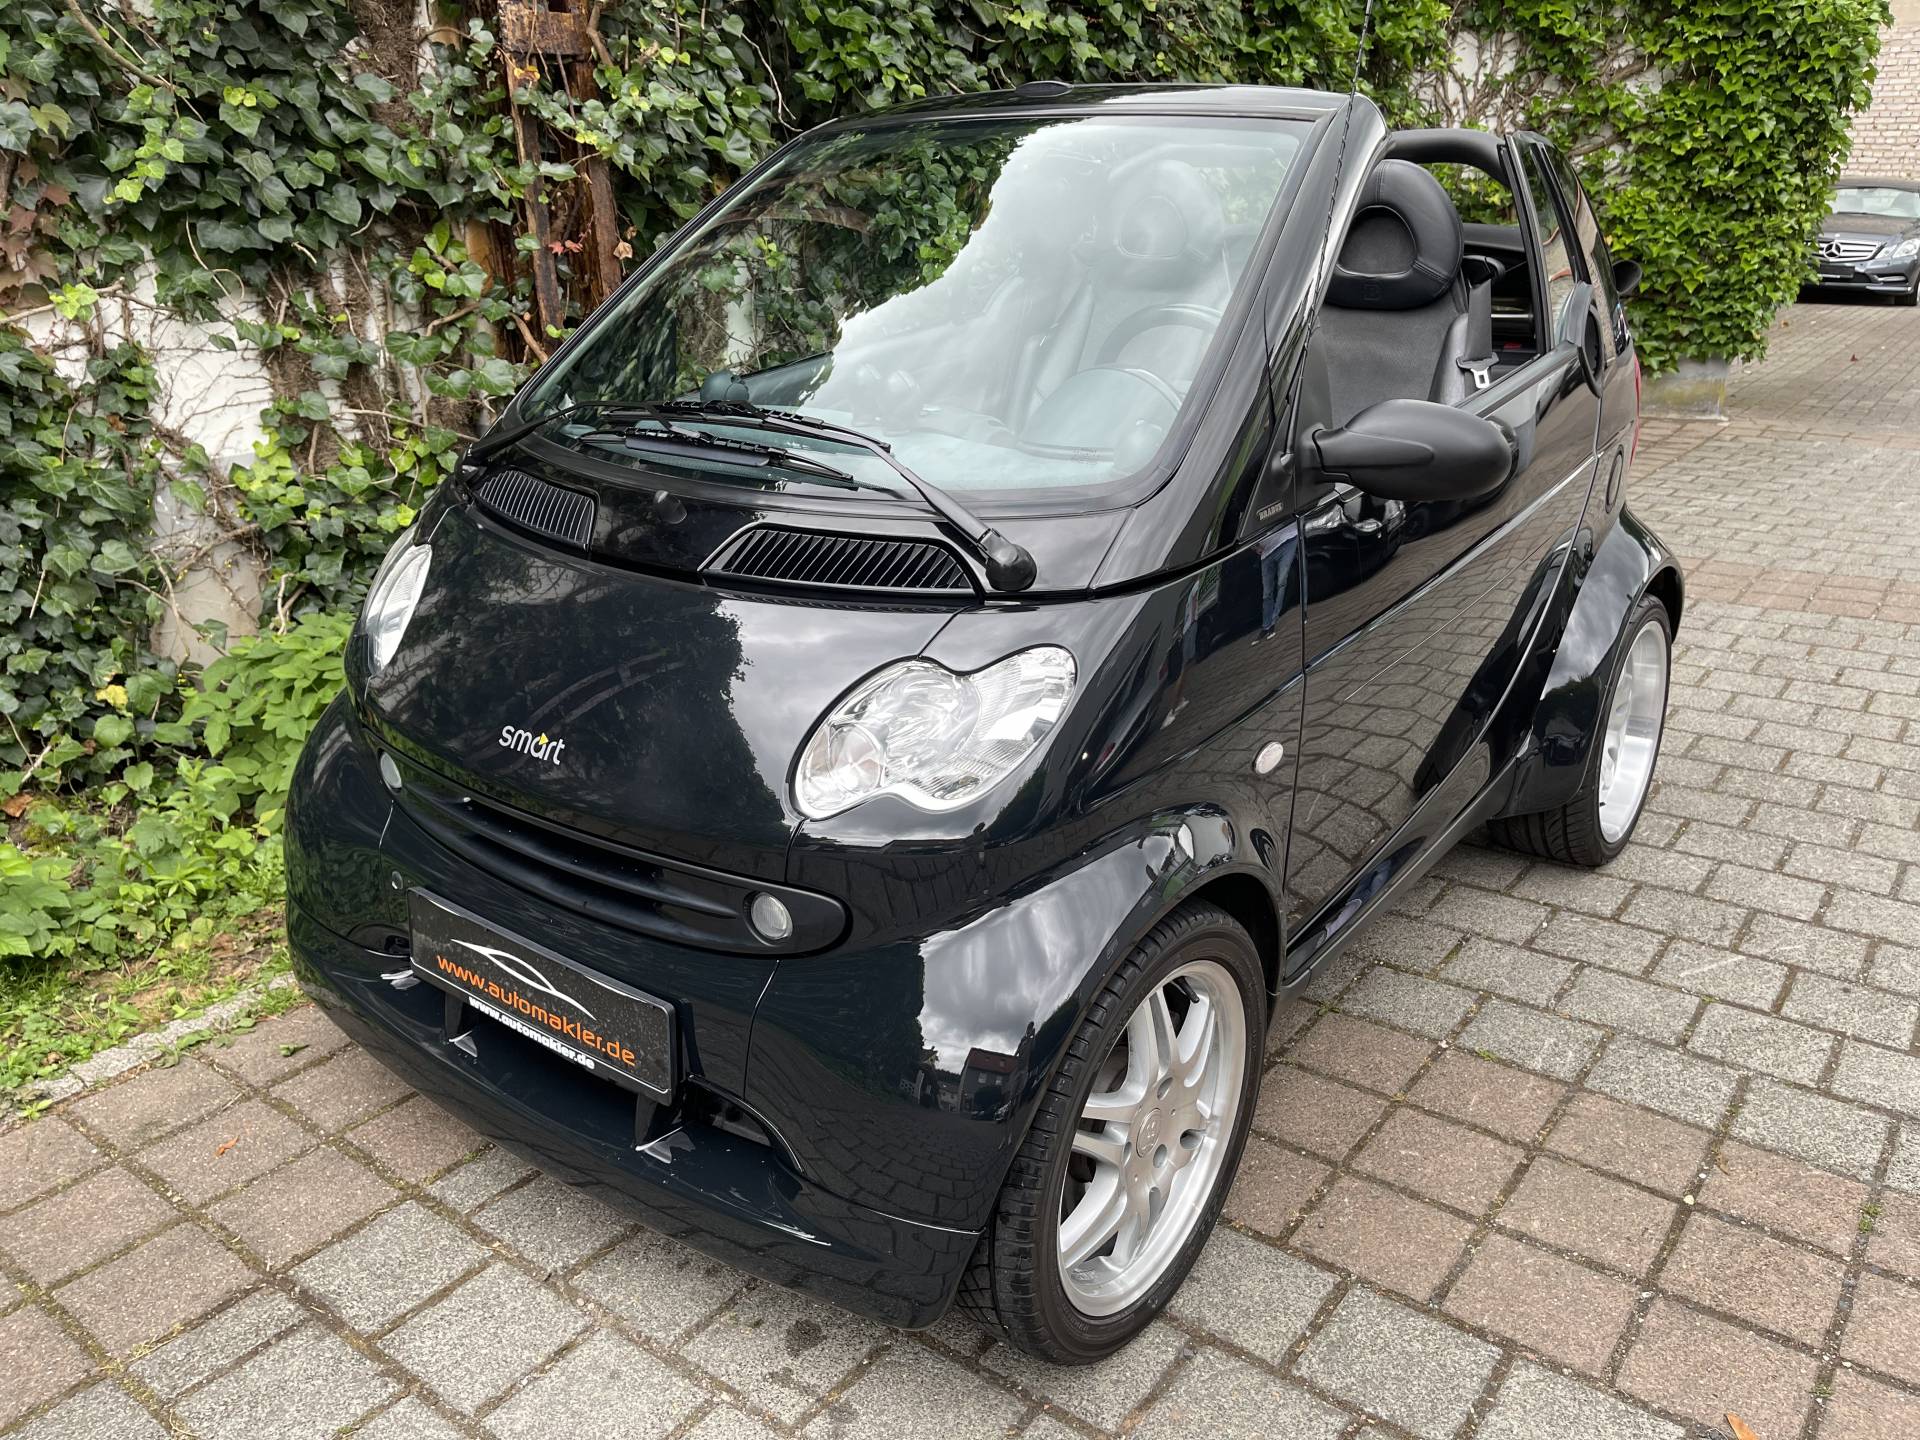 Smart Fortwo A 450 Convertible Classic Cars for Sale - Classic Trader